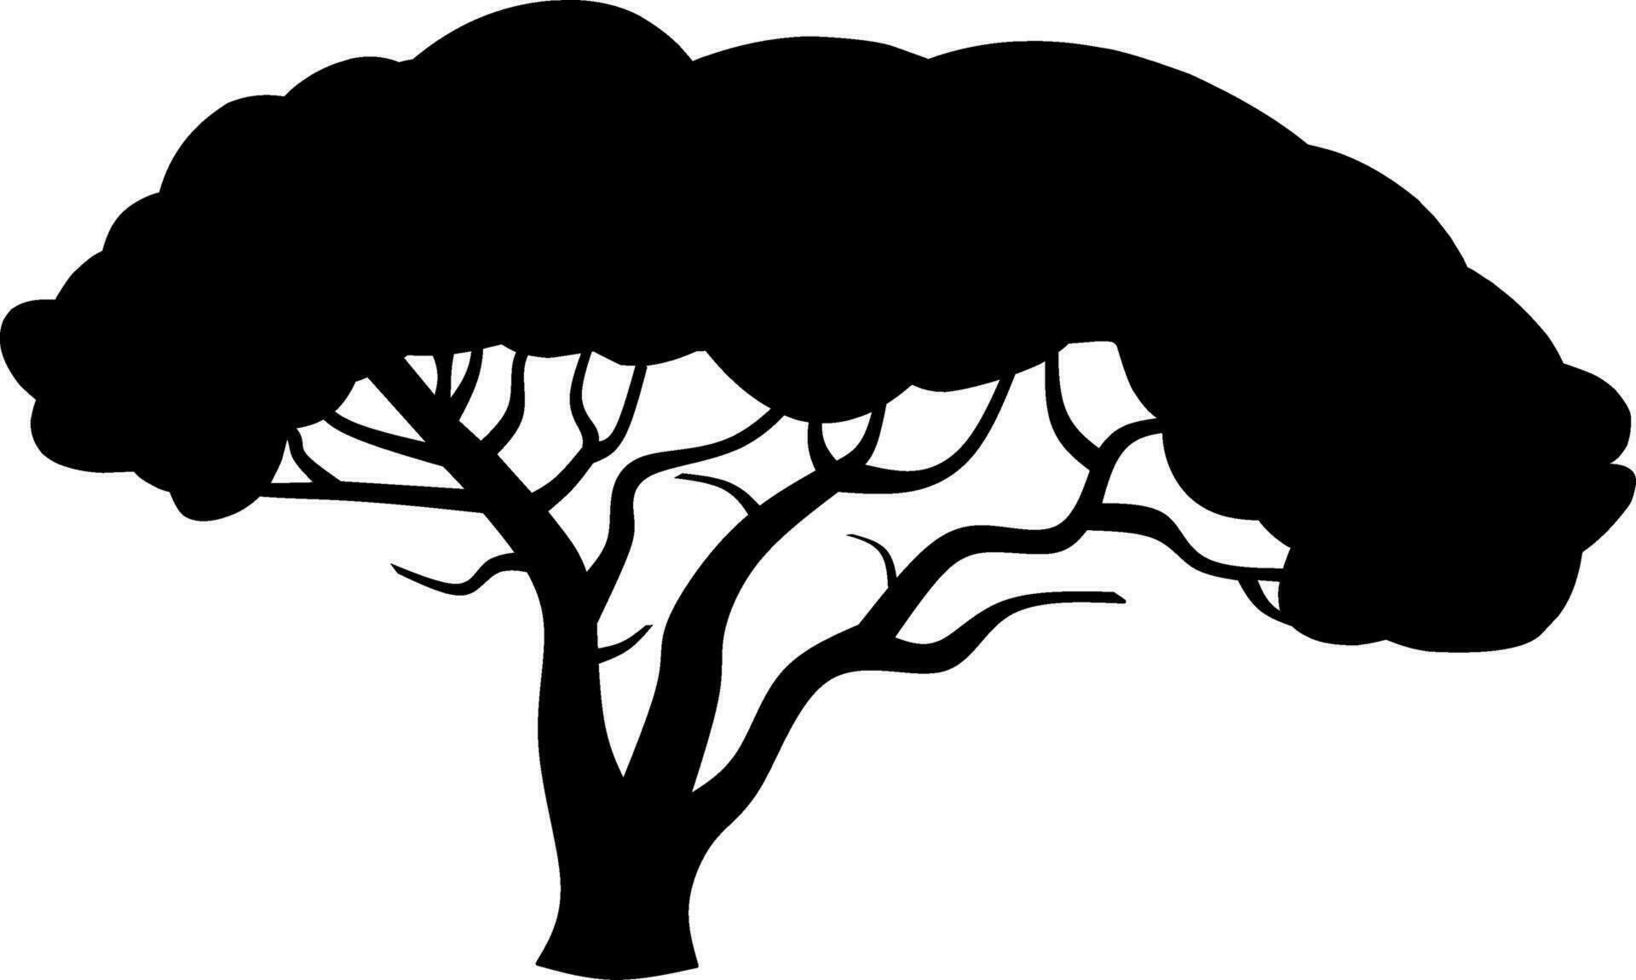 African tree icon vector illustration. African tree silhouette for icon, symbol or sign. Tree symbol for design about wildlife, nature, plant, flora, forest and ecology